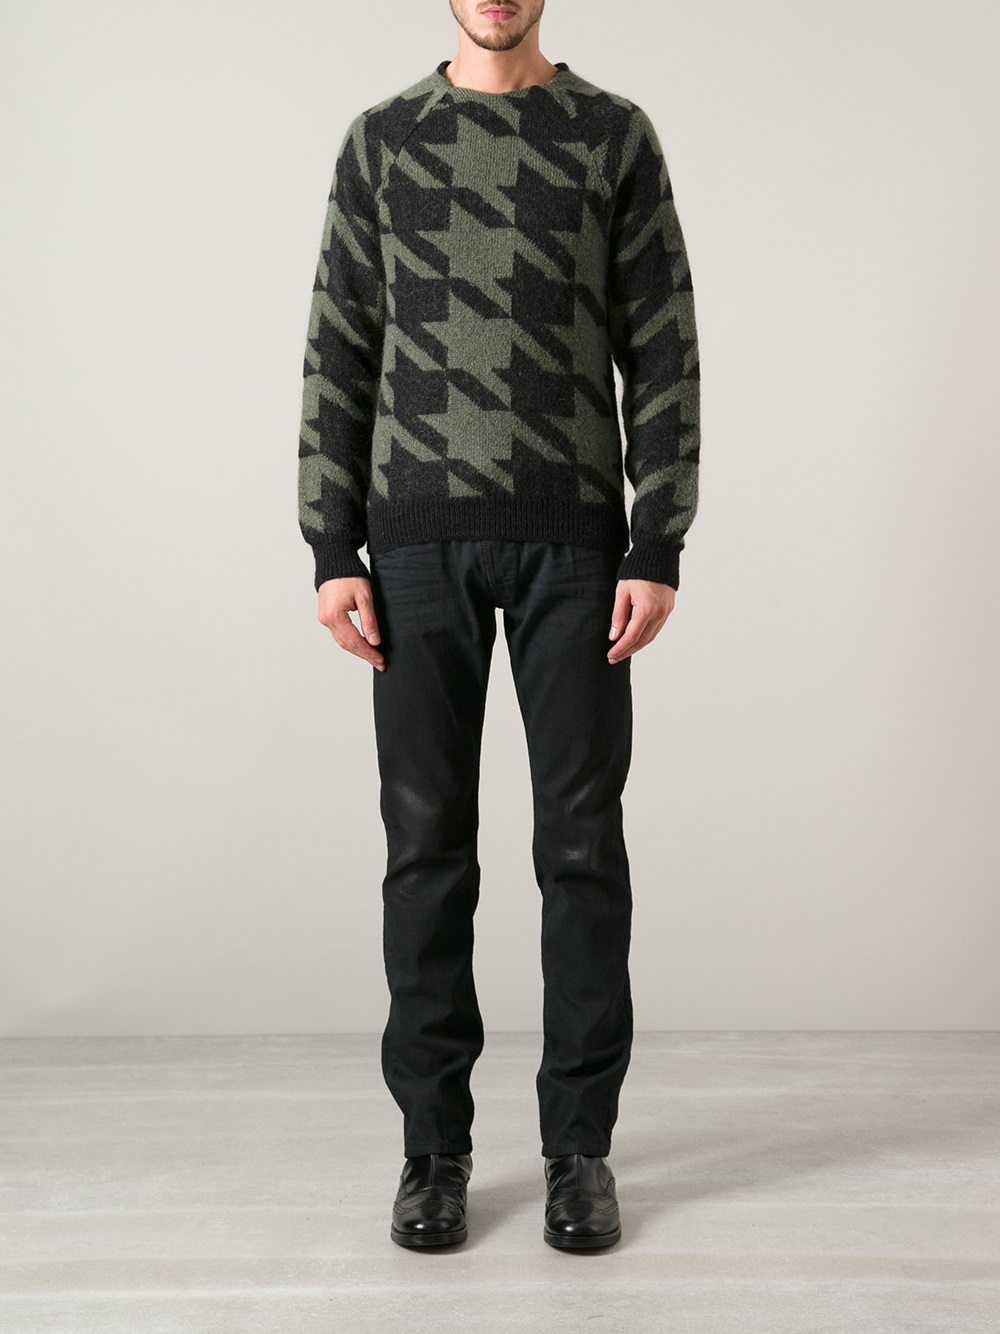 Paul Smith Houndstooth Sweater in Green (Black) for Men - Lyst